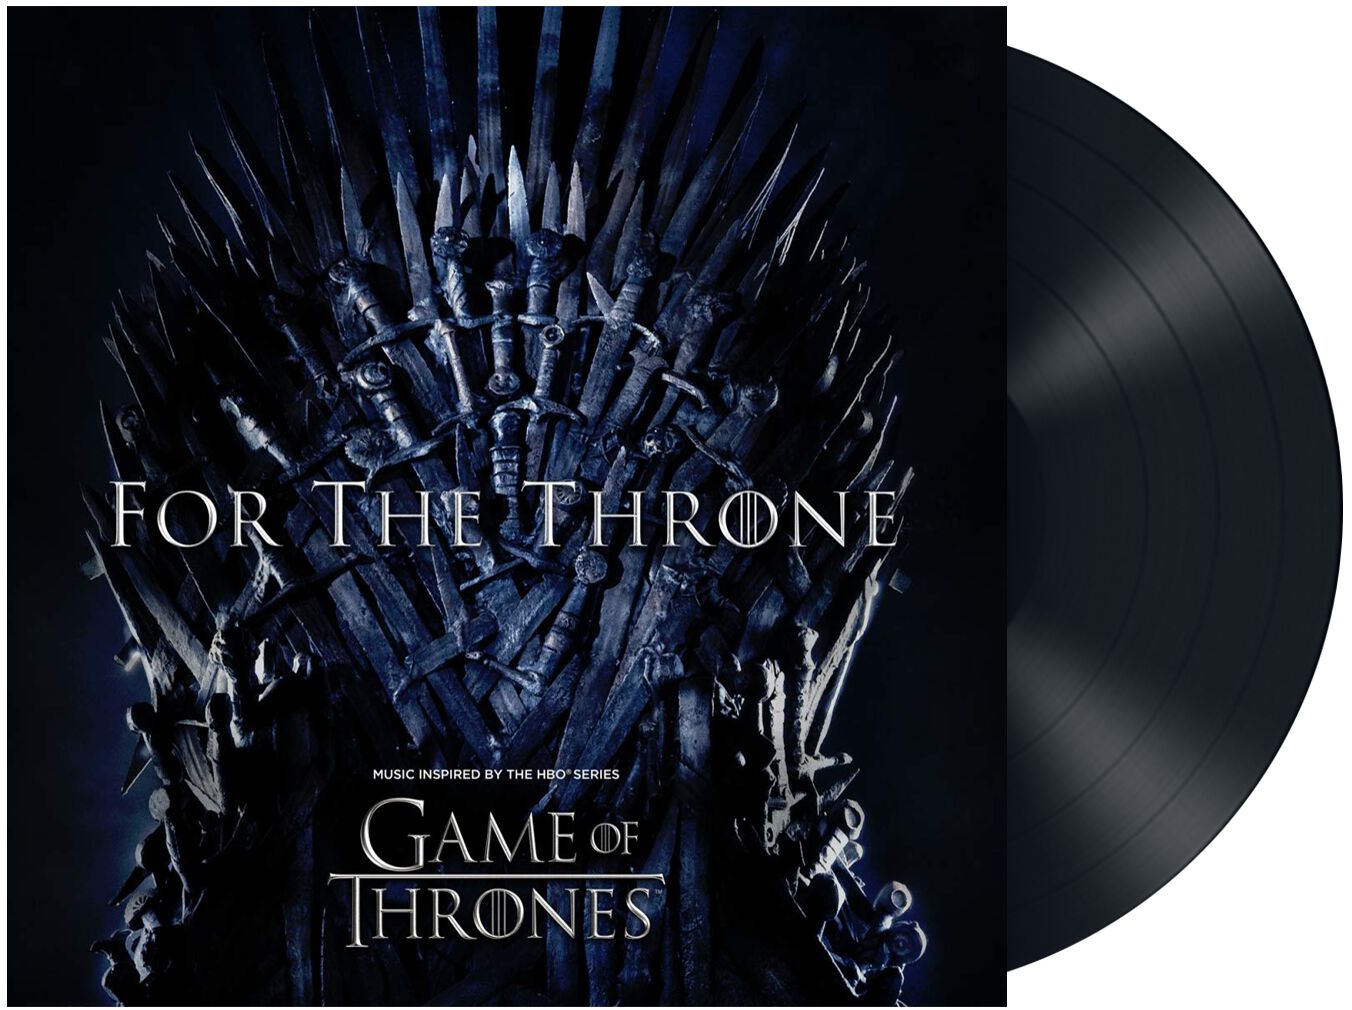 Game Of Thrones For the throne (Music inspired by the HBO series Game Of Thrones LP multicolor von Game Of Thrones